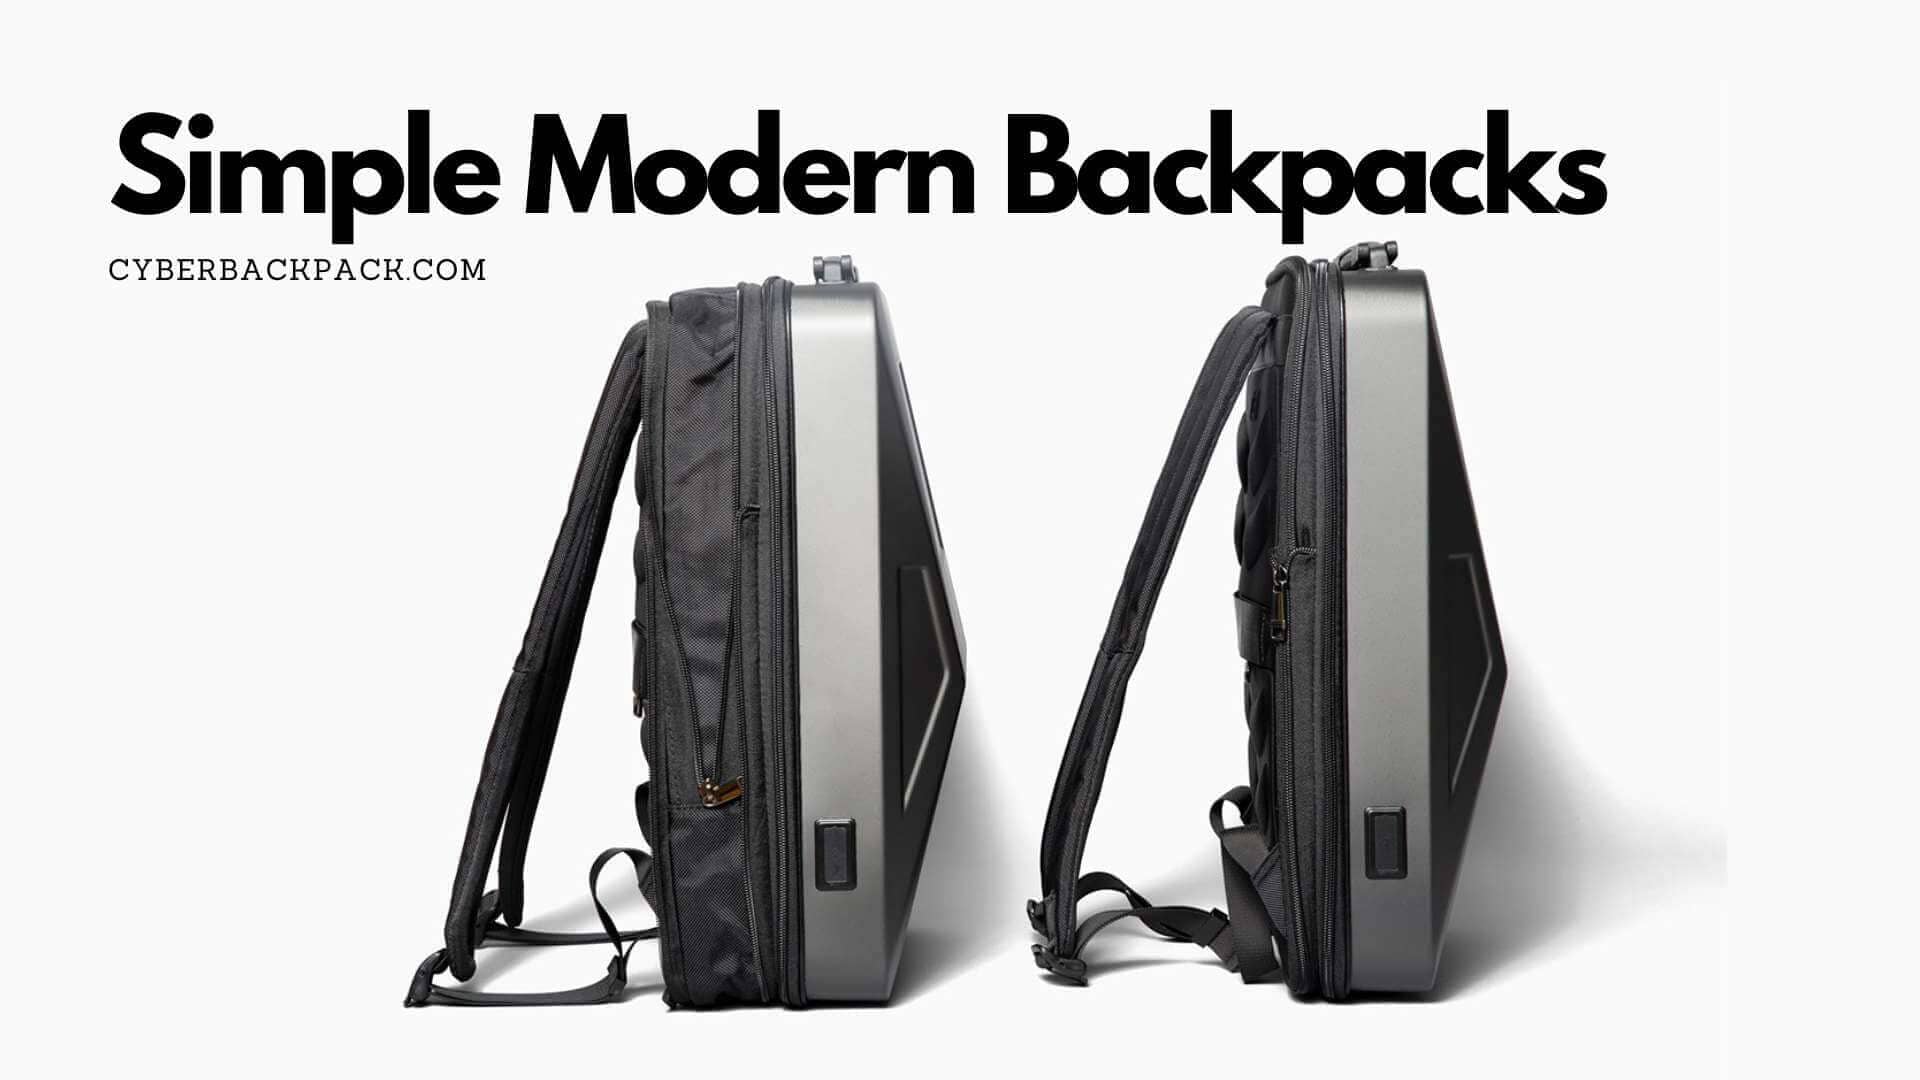 http://cyberbackpack.com/cdn/shop/articles/simple-modern-backpack-a-comprehensive-guide-to-the-cyberbackpack-and-its-innovative-design-344189.jpg?v=1683927959